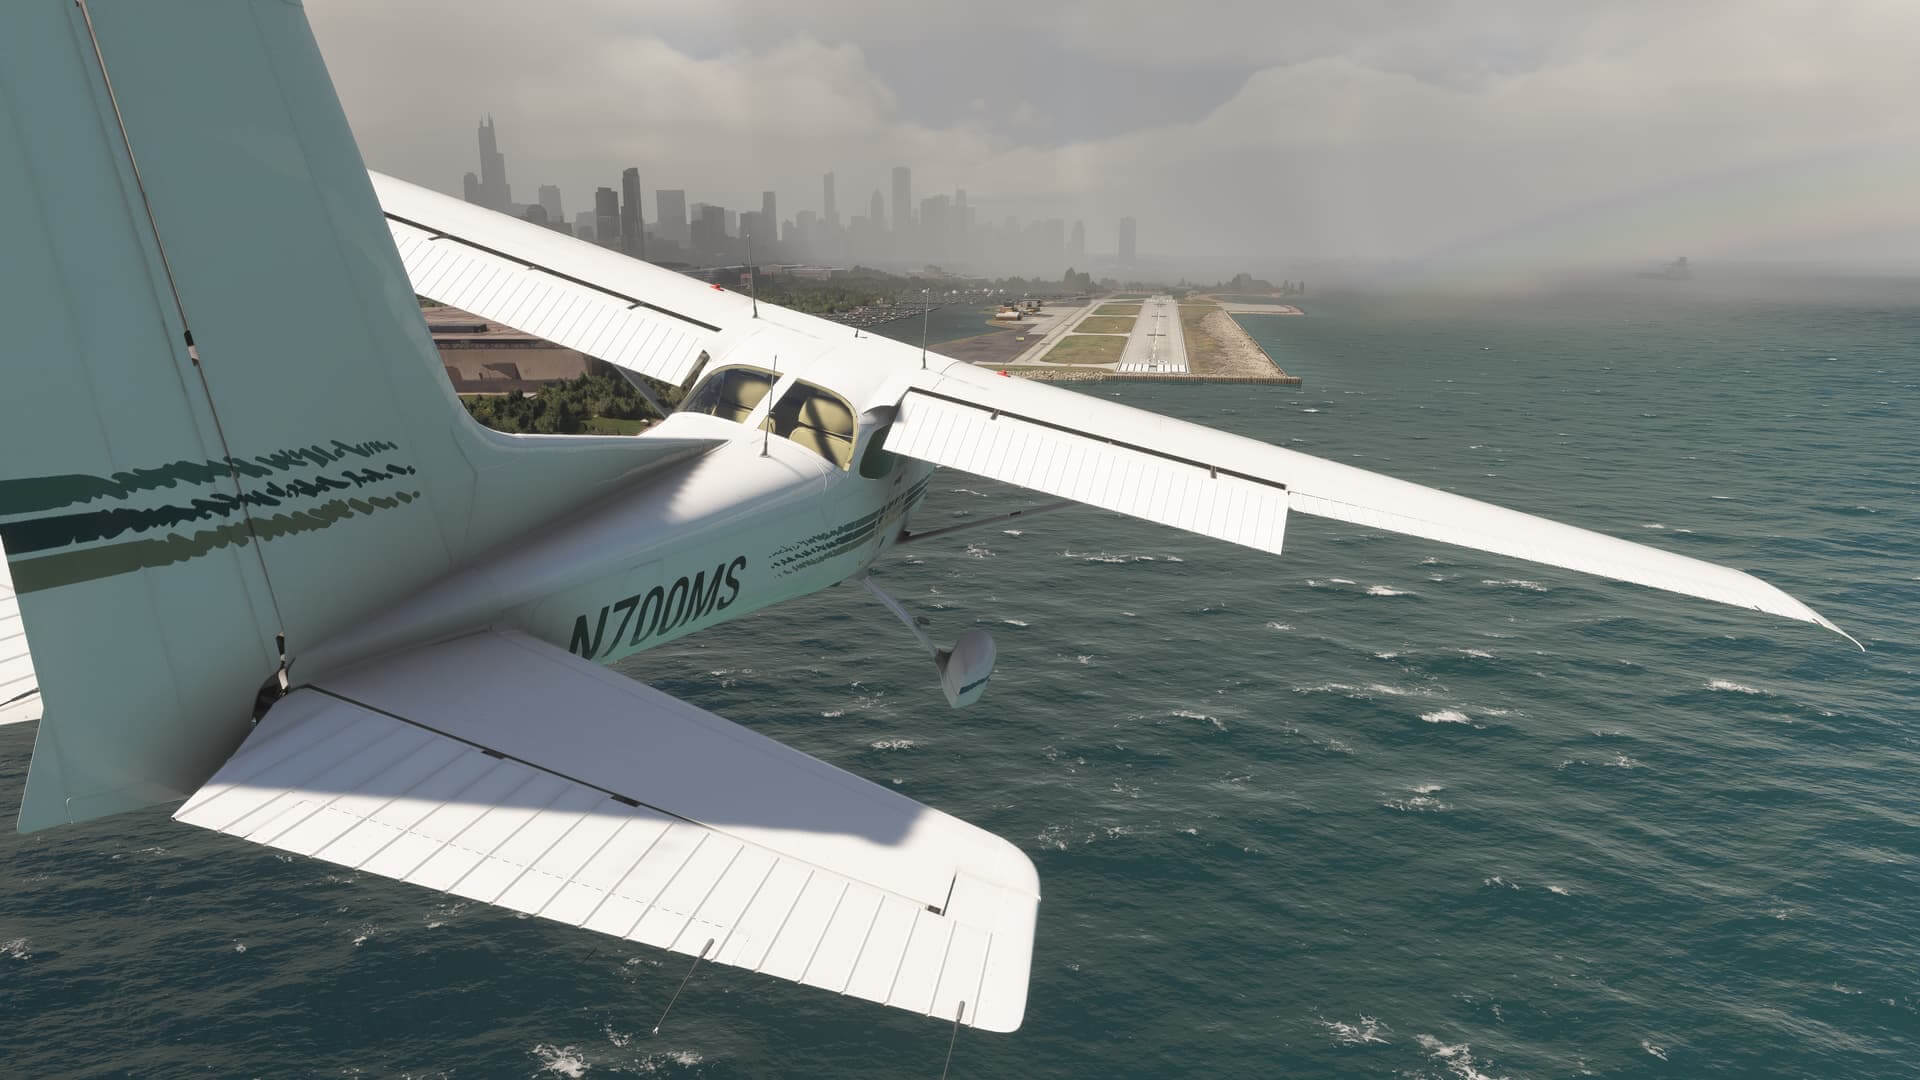 A Cessna 172 with flaps deployed banks to the right to correct its course whilst on short final to land on a runway strip ahead. The airport is surrounded by choppy water, with mist in the distance near city skyscrapers.